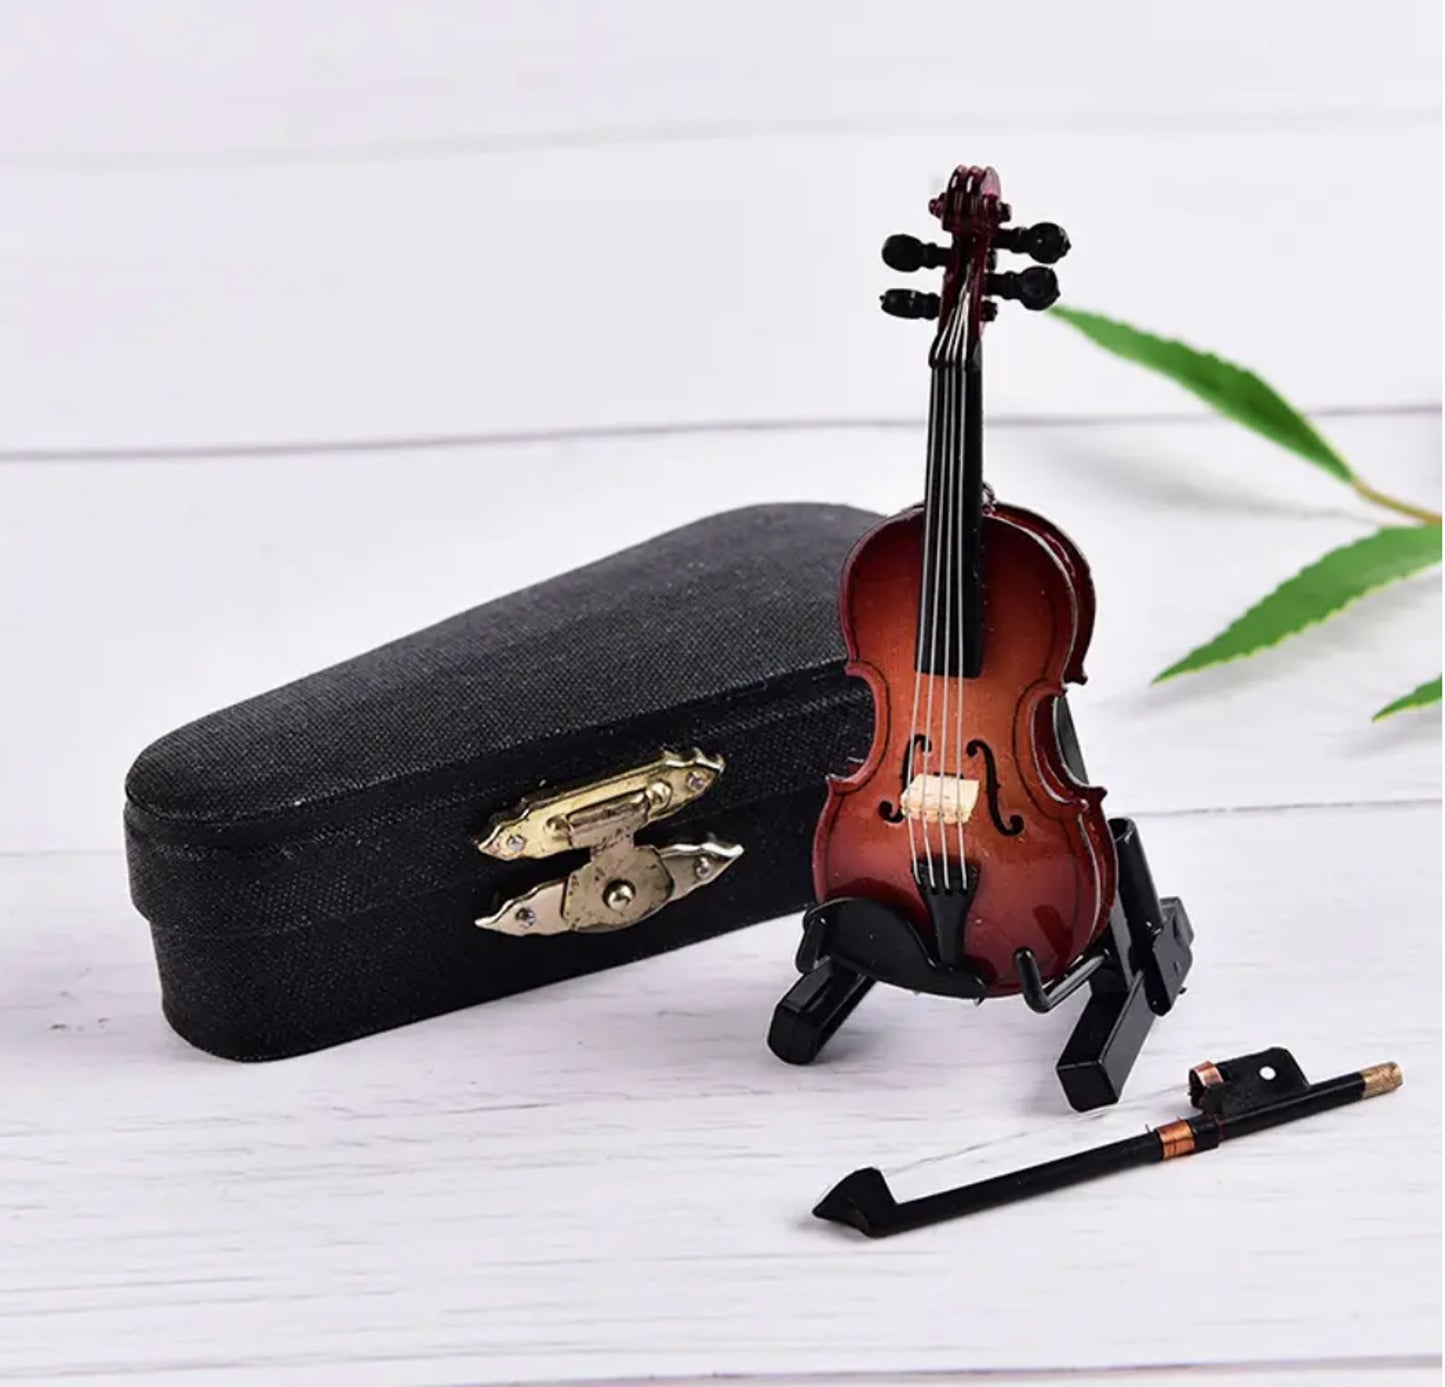 Miniature Cello - Musical Instrument Dollhouse Accessory - Photography Props - BJD